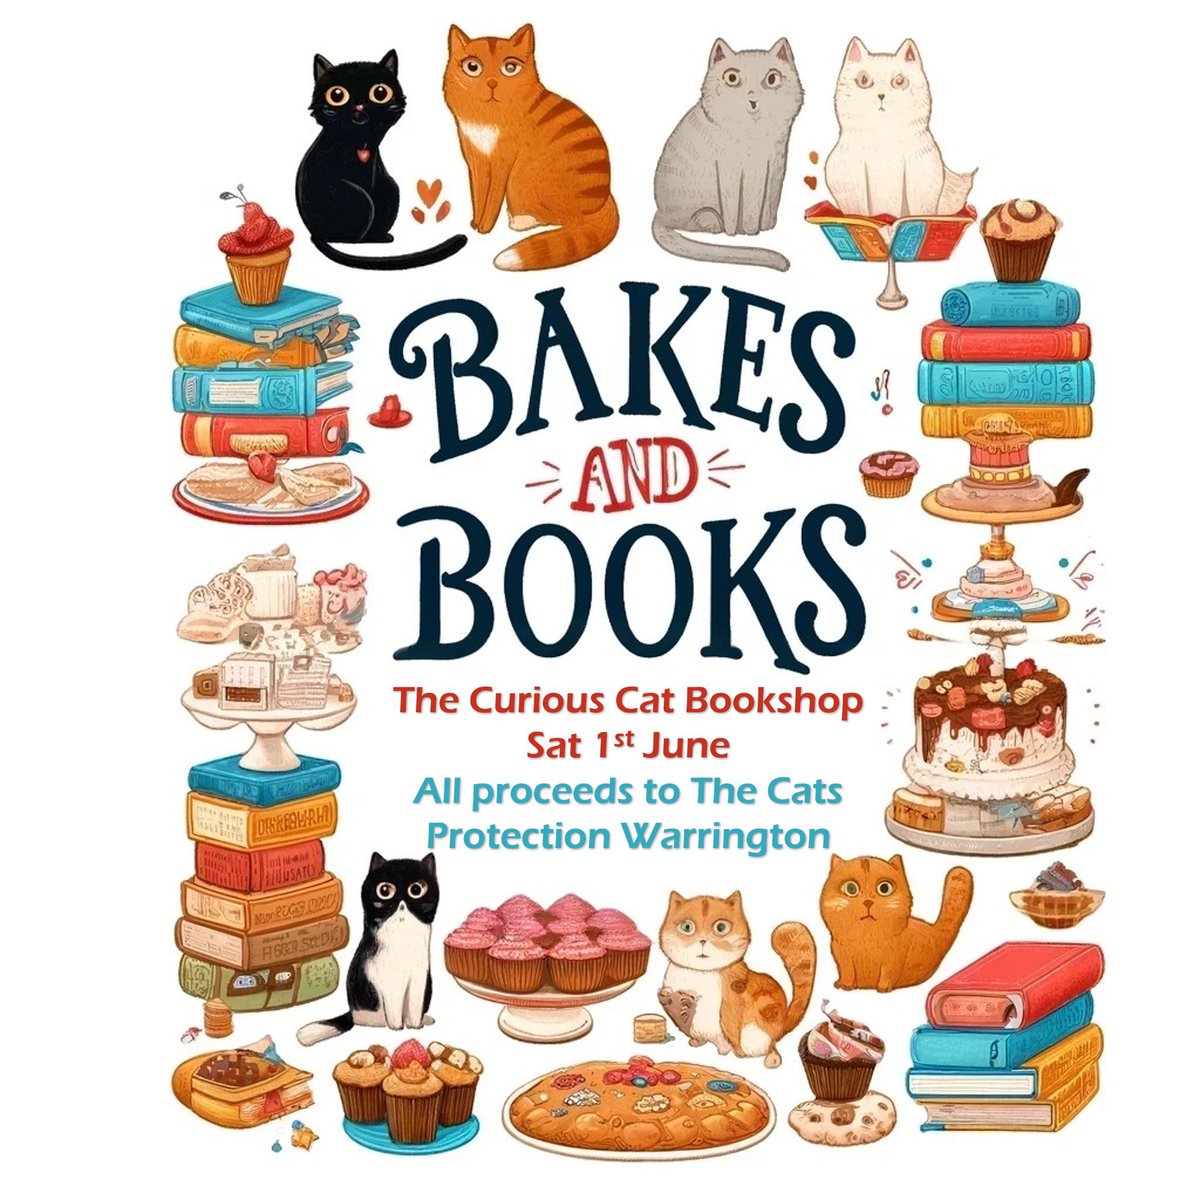 Saturday 1st June, 9am-5pm #TheCuriousCatBookshop #Frodsham are hosting a charity event ‘Bakes & Books’ to support cats in our care 🍰📚 50 Main Street, Frodsham, WA6 7AU. They will also be accepting cat food and cat essentials on our behalf 😻 #CatsOnTwitter #CatsOnX